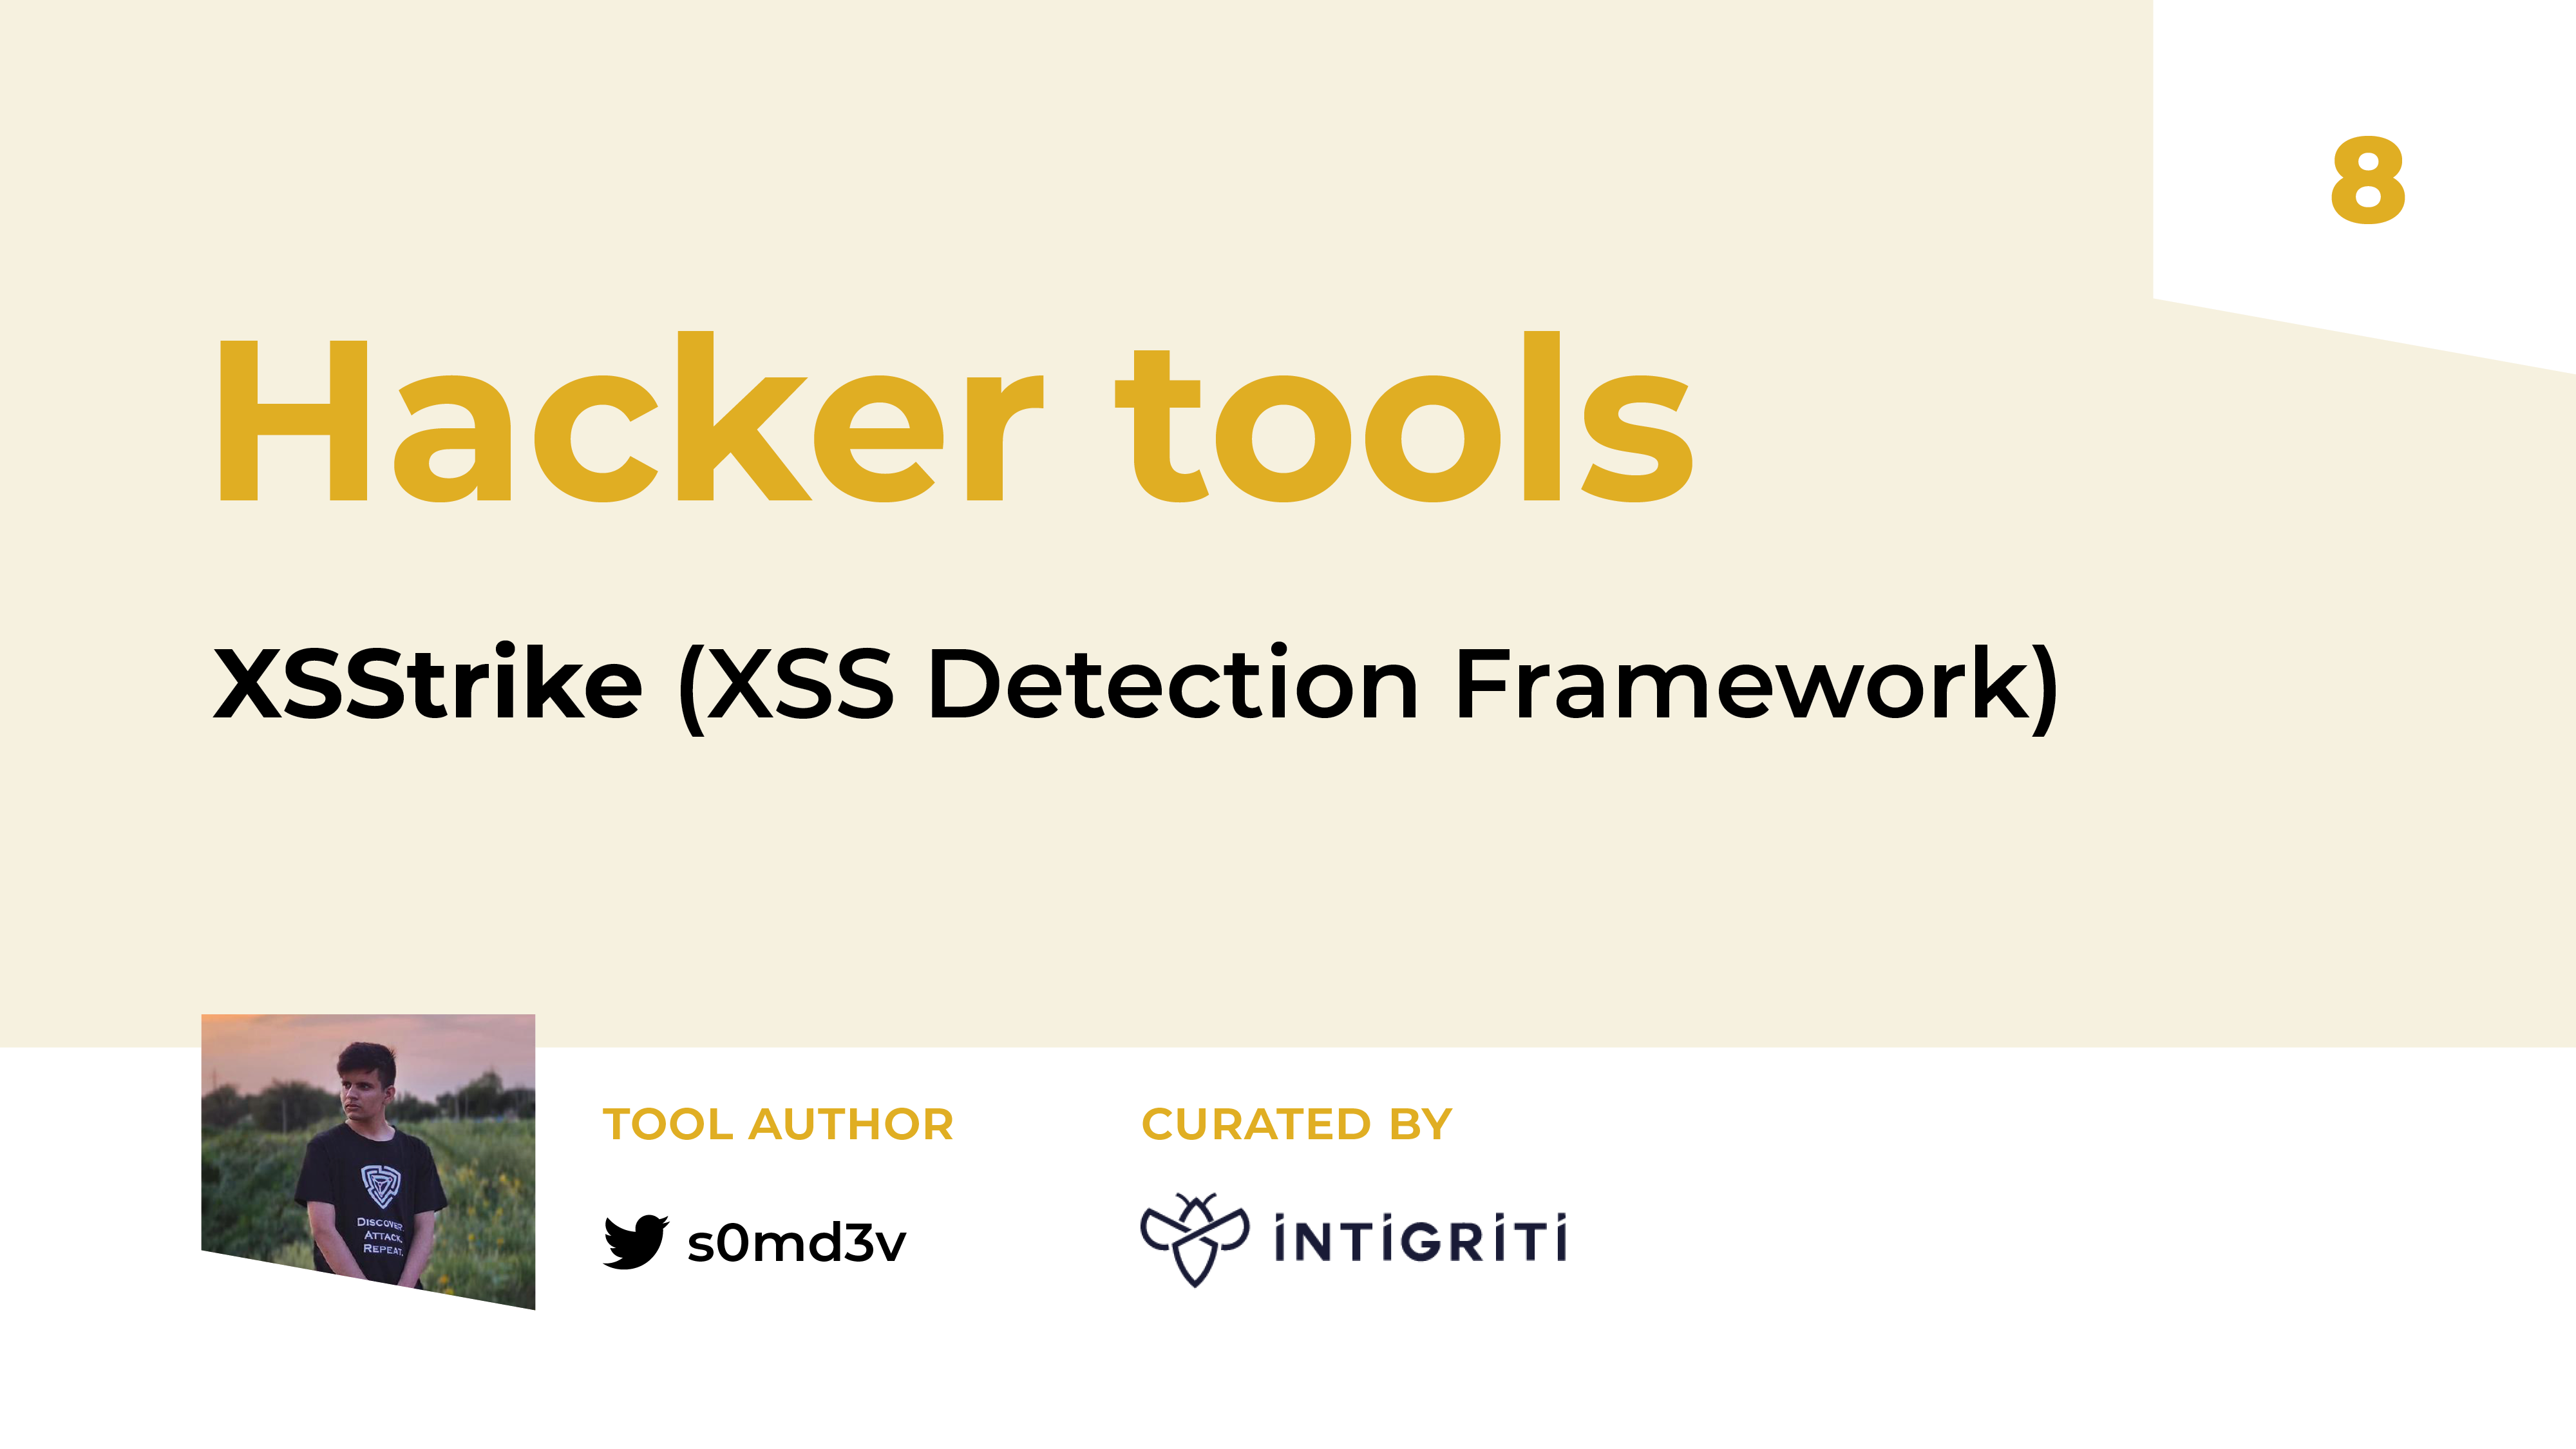 XSStrike - Fuzz and Bruteforce Parameters for XSS